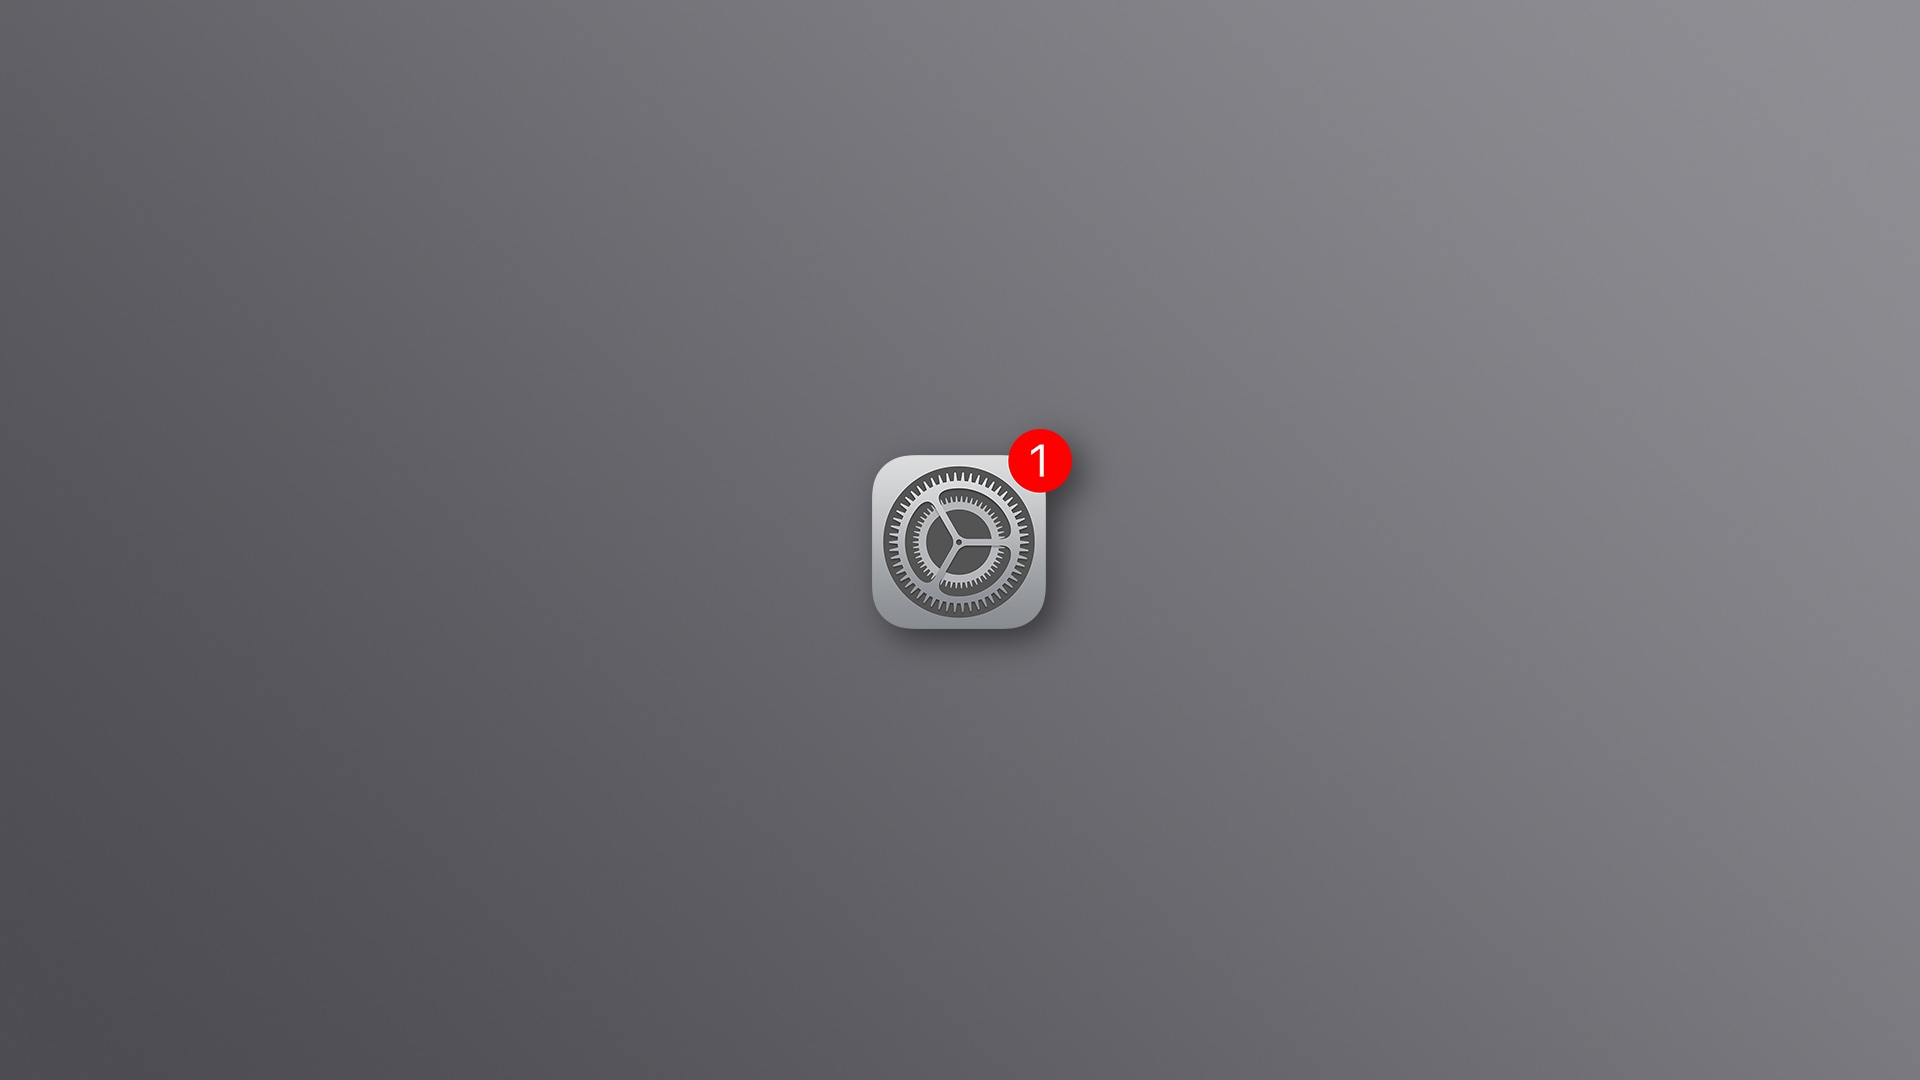 The iPhone's Settings icon with red badge, set against a gray background.